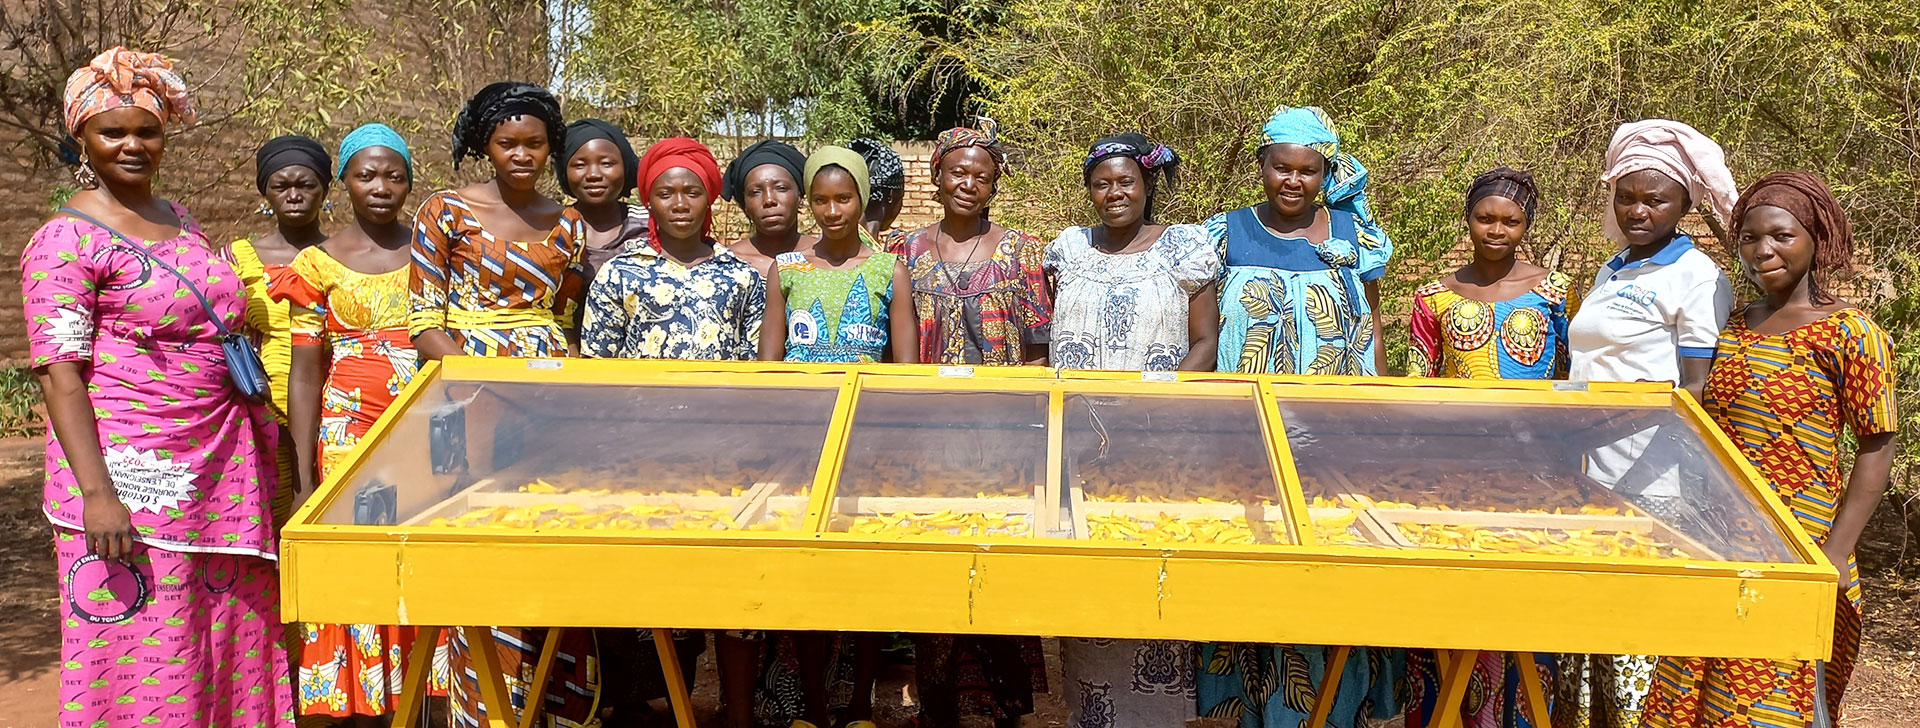 In Chad, the Mango Drier Project offered women additional income and greater food security